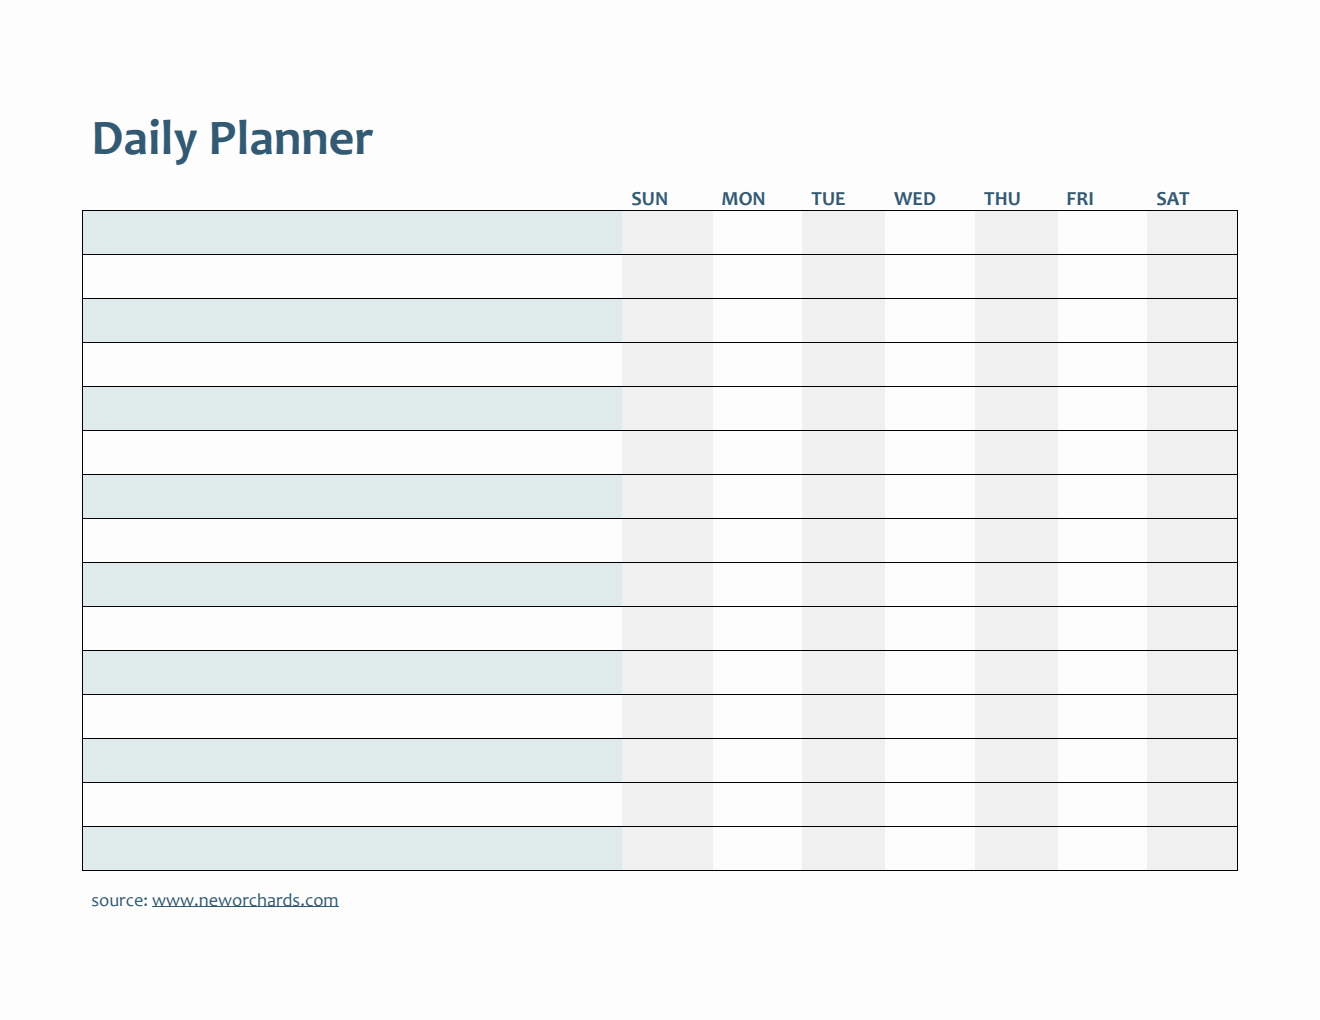 Daily Planner Template Customizable in PDF